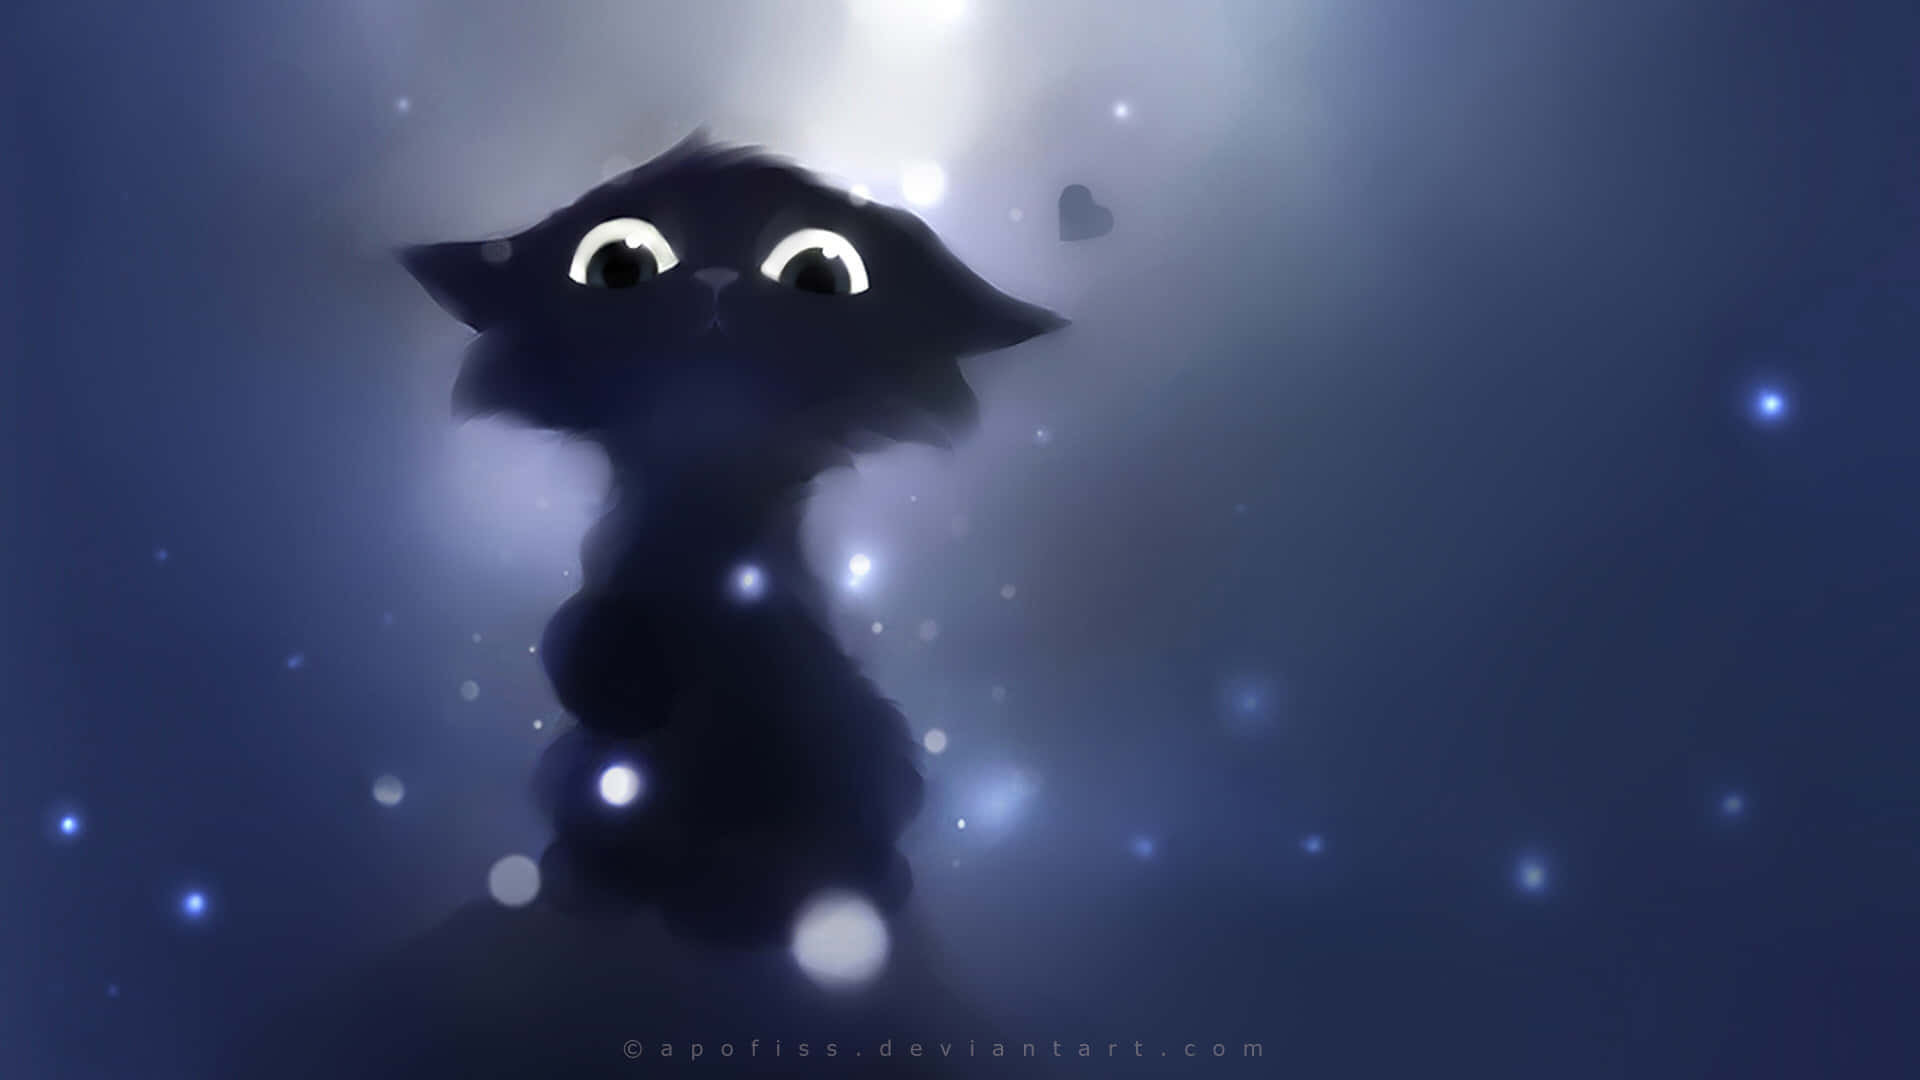 A Black Cat With Big Eyes Looking Up At The Stars Wallpaper